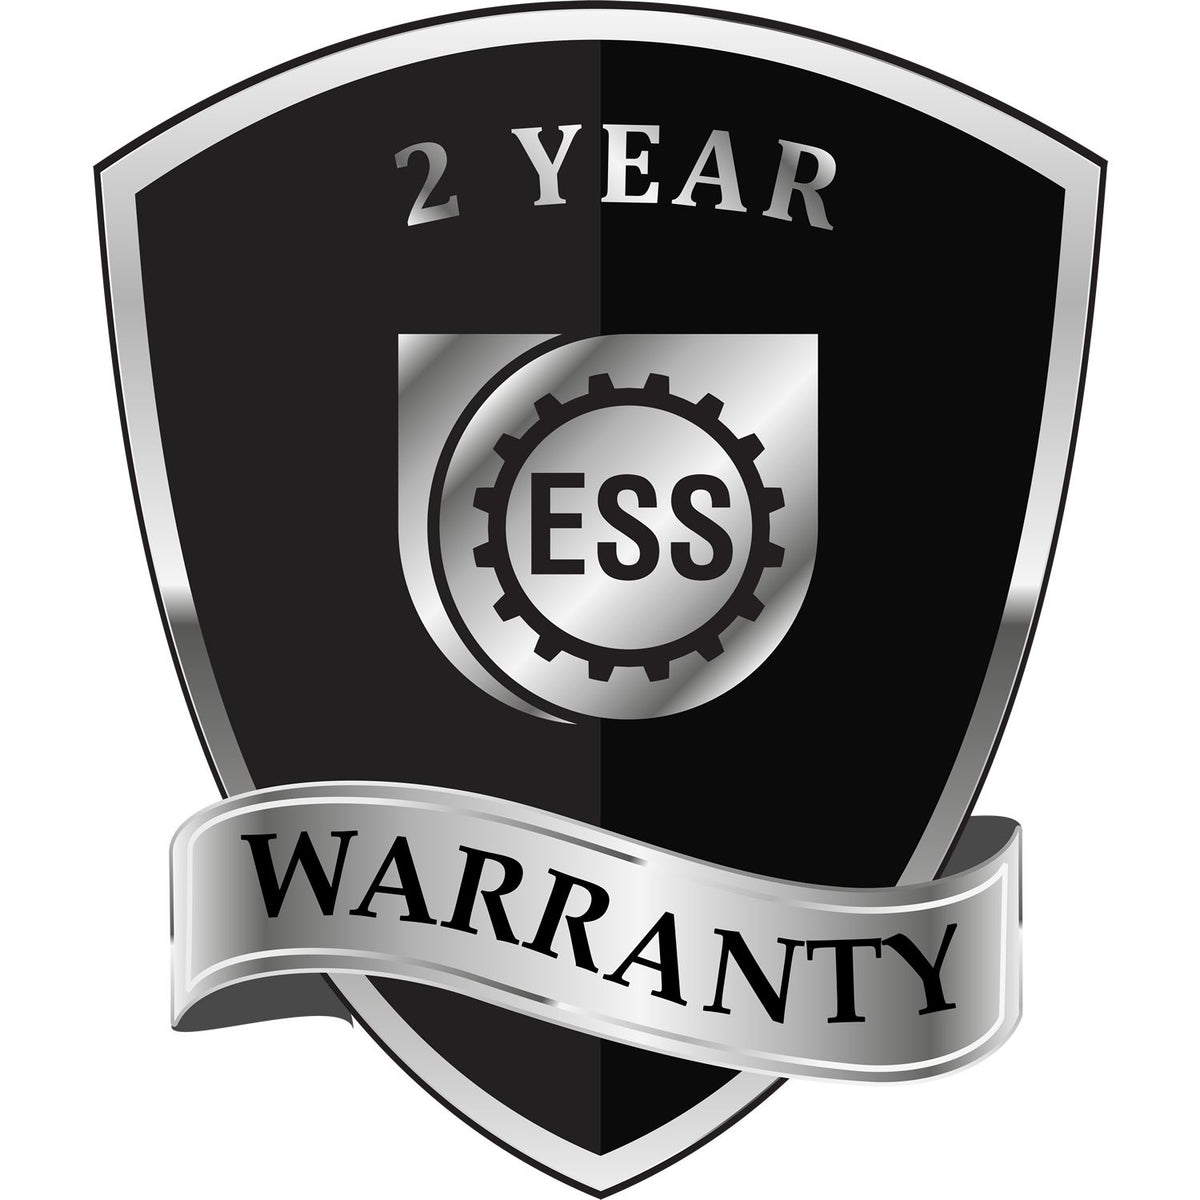 A black and silver badge or emblem showing warranty information for the Heavy Duty Cast Iron Hawaii Geologist Seal Embosser